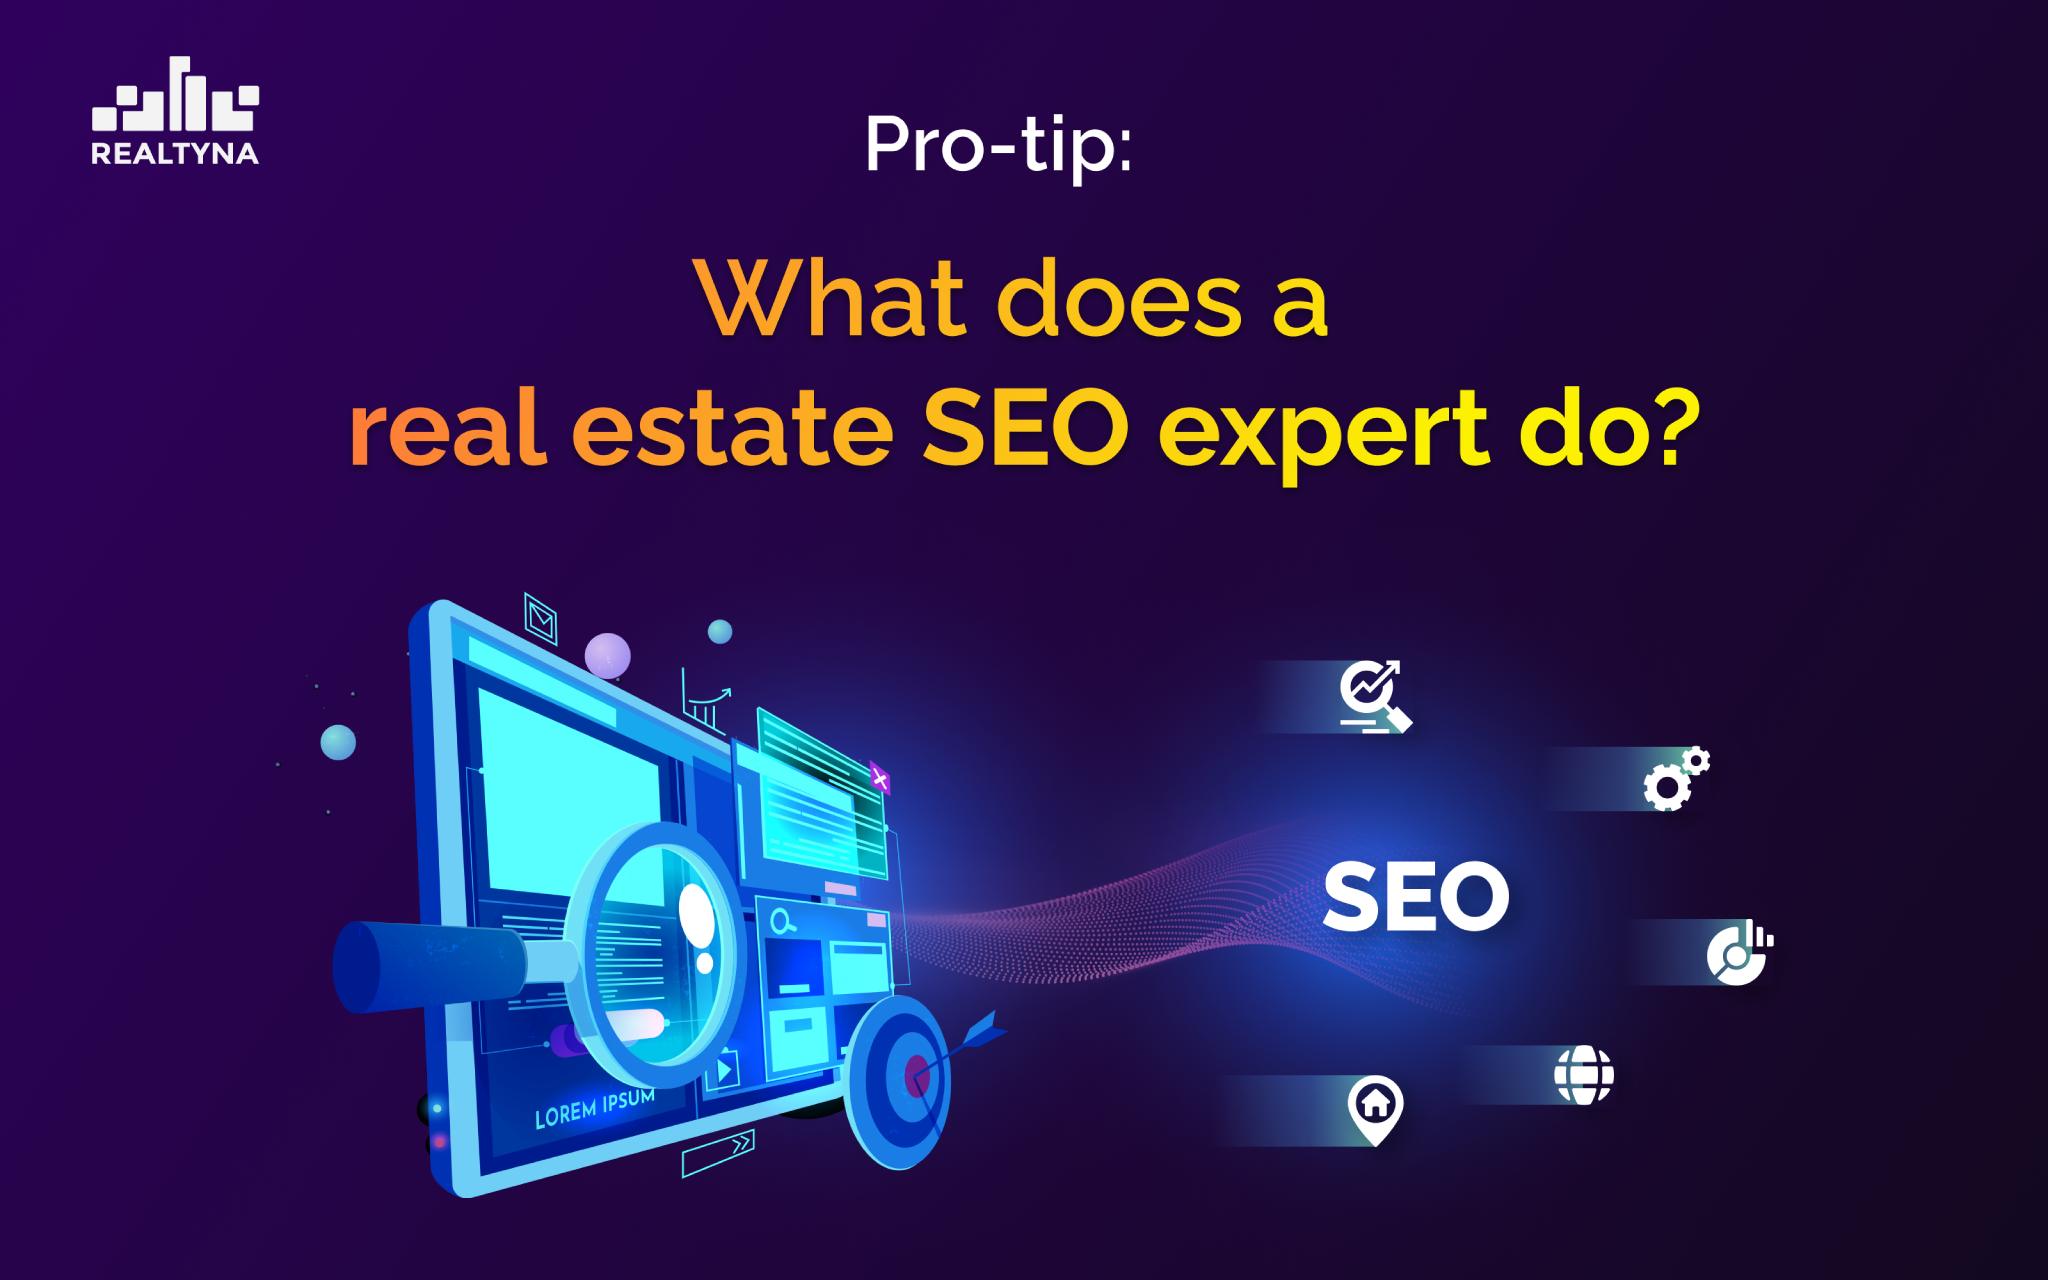 What does a real estate SEO expert do?